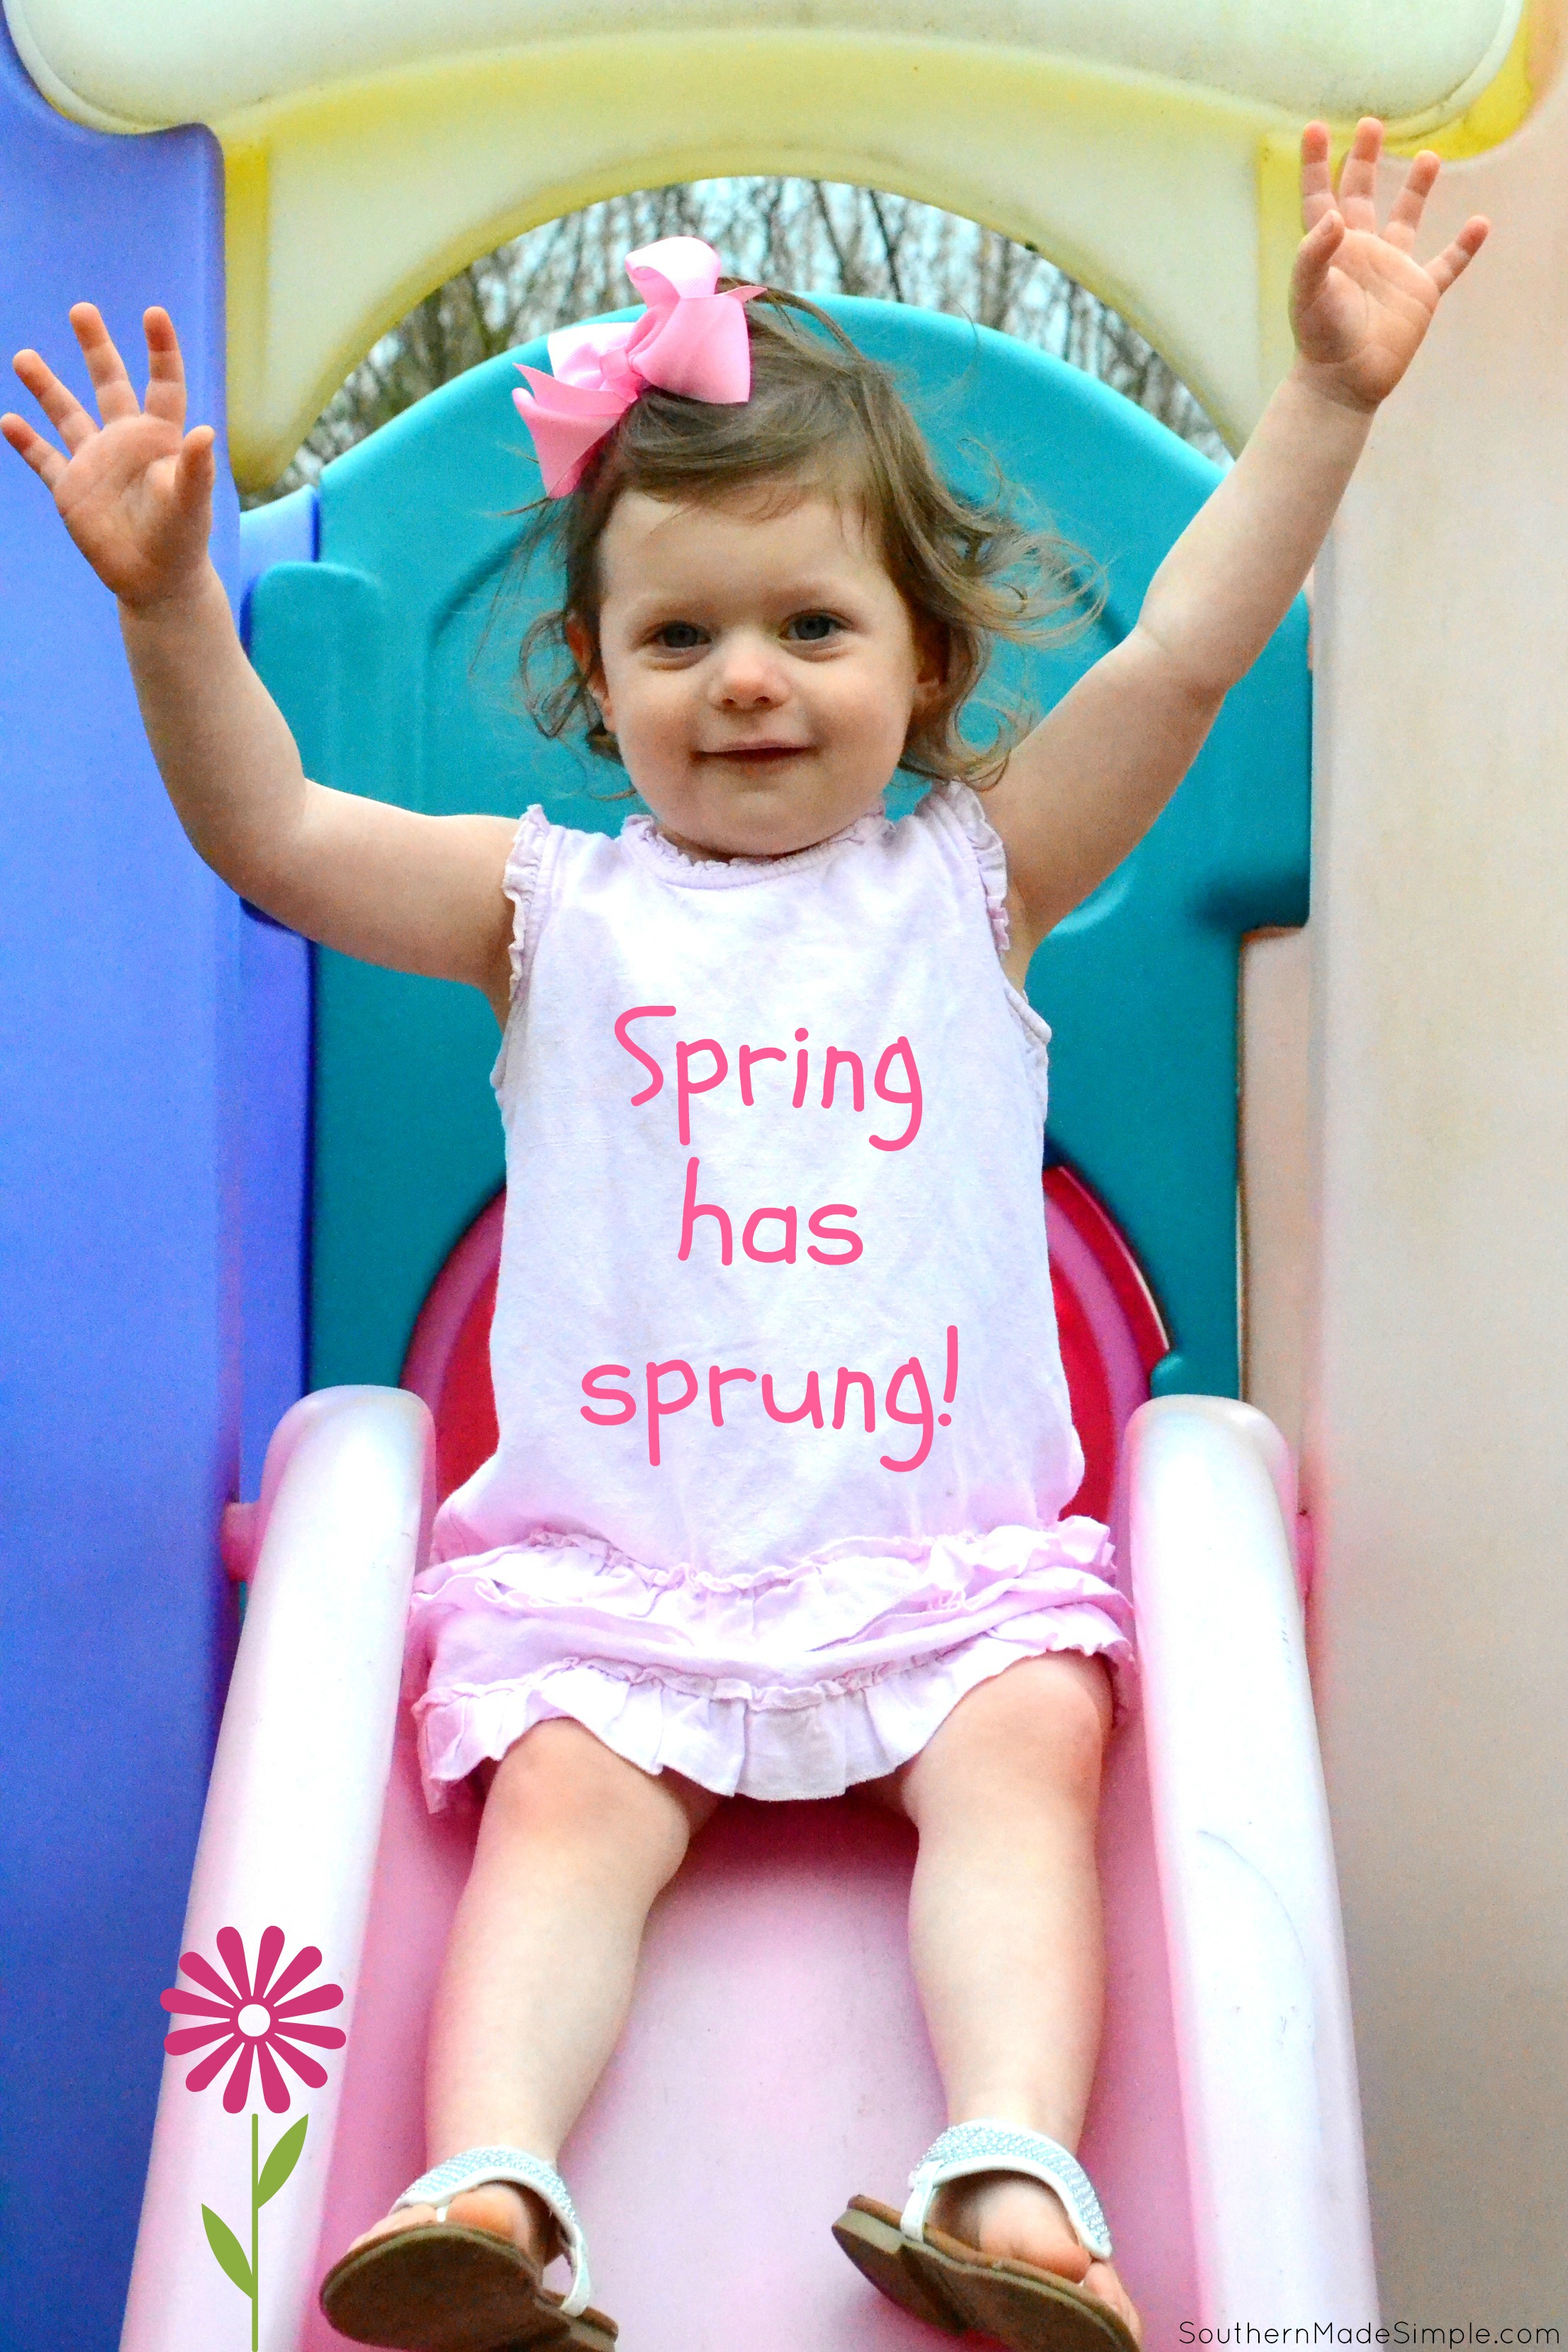 Sliding Into Spring: Encouraging Outdoor Play: Luvs Diapers Print at Home Coupon